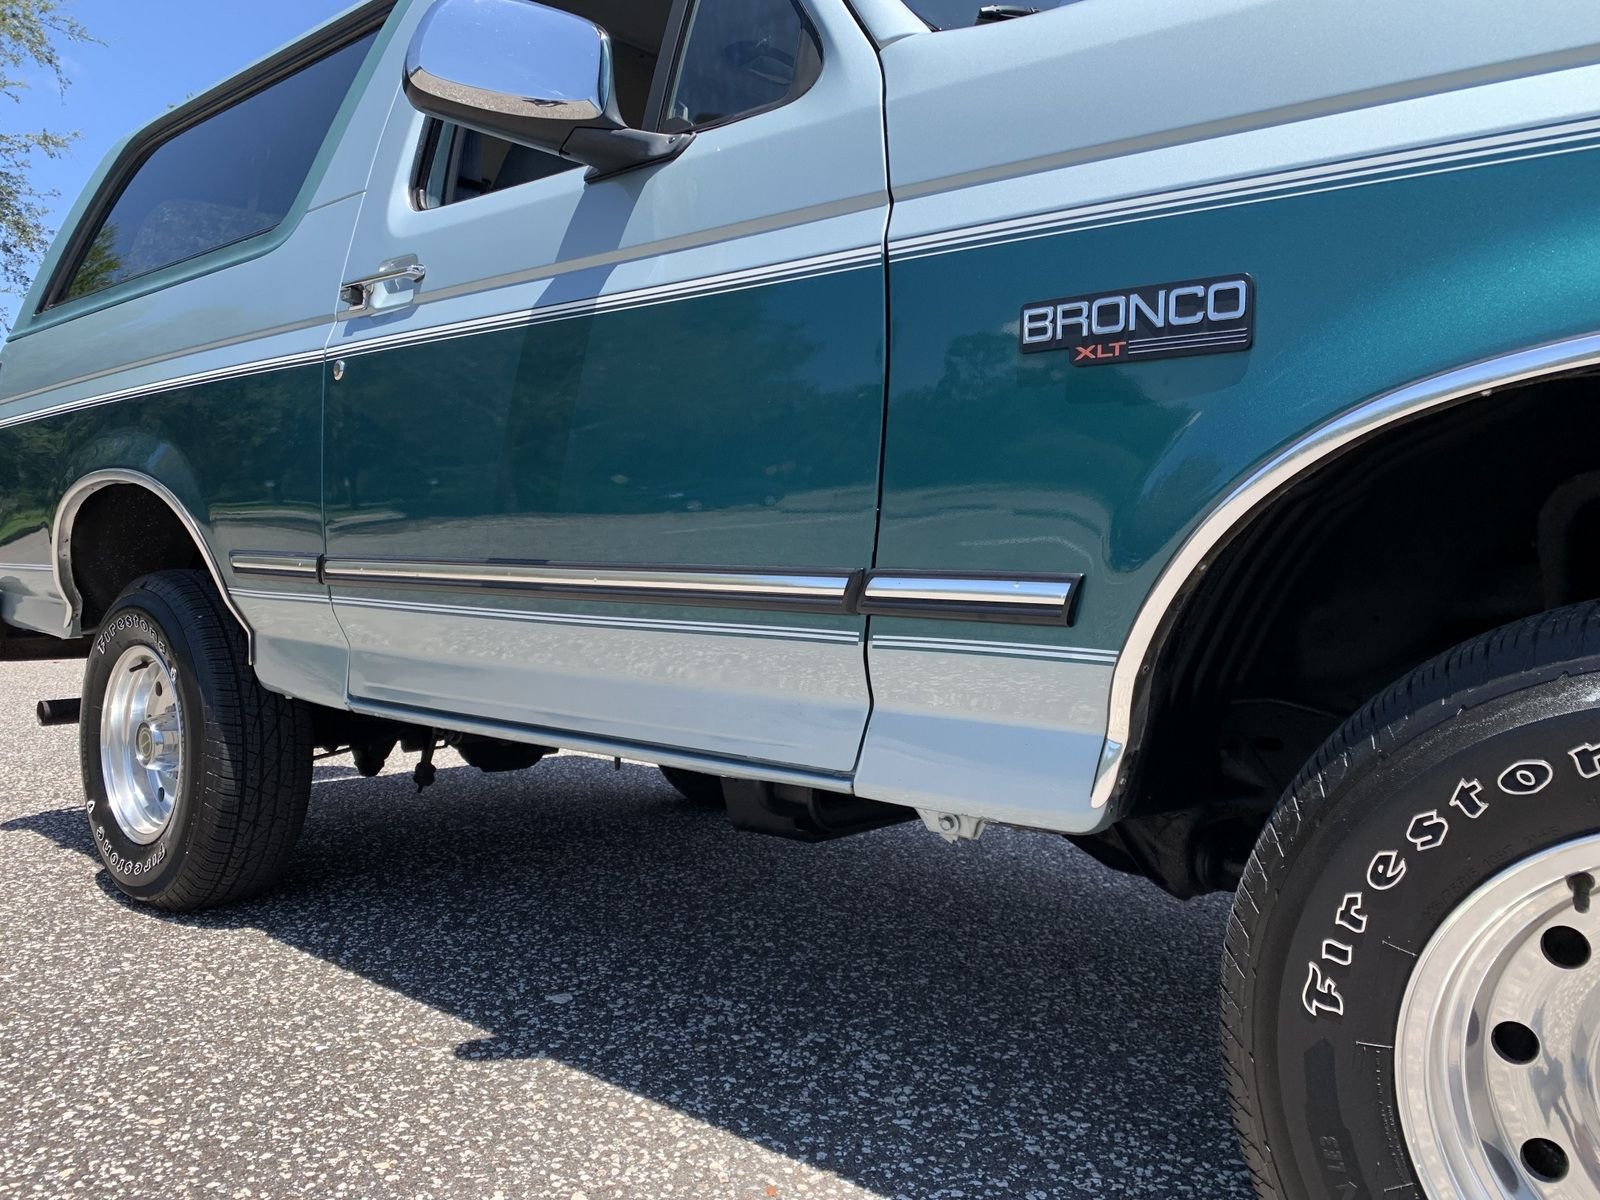 For Sale 1996 Ford Bronco